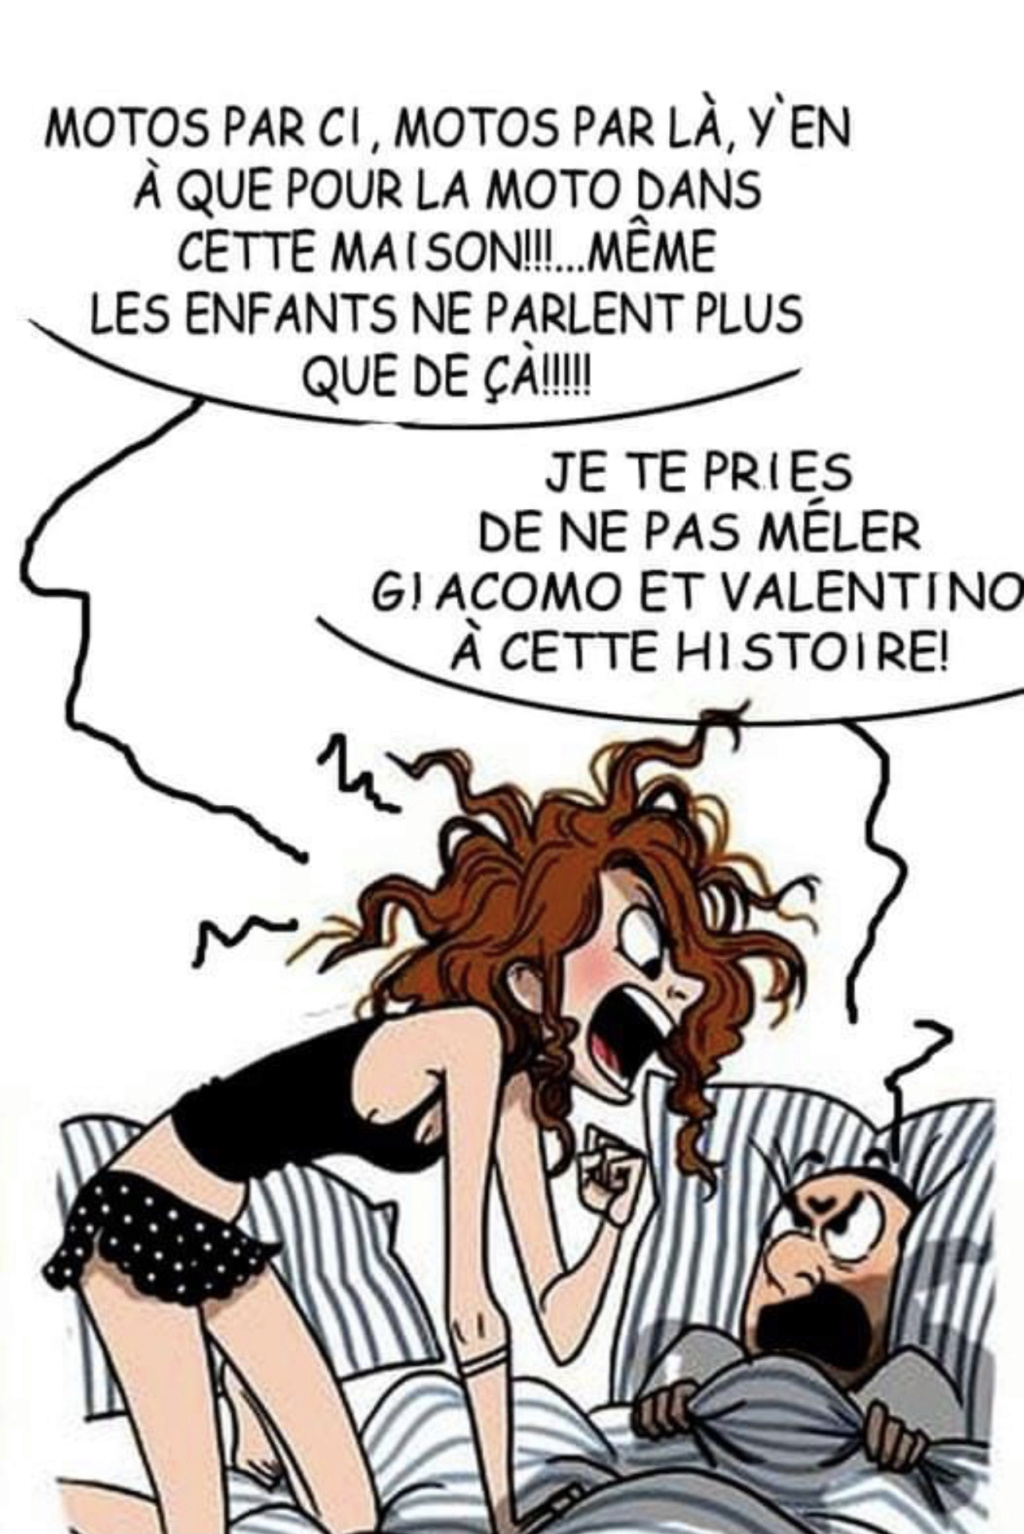 Humour en image du Forum Passion-Harley  ... - Page 33 Img_1817